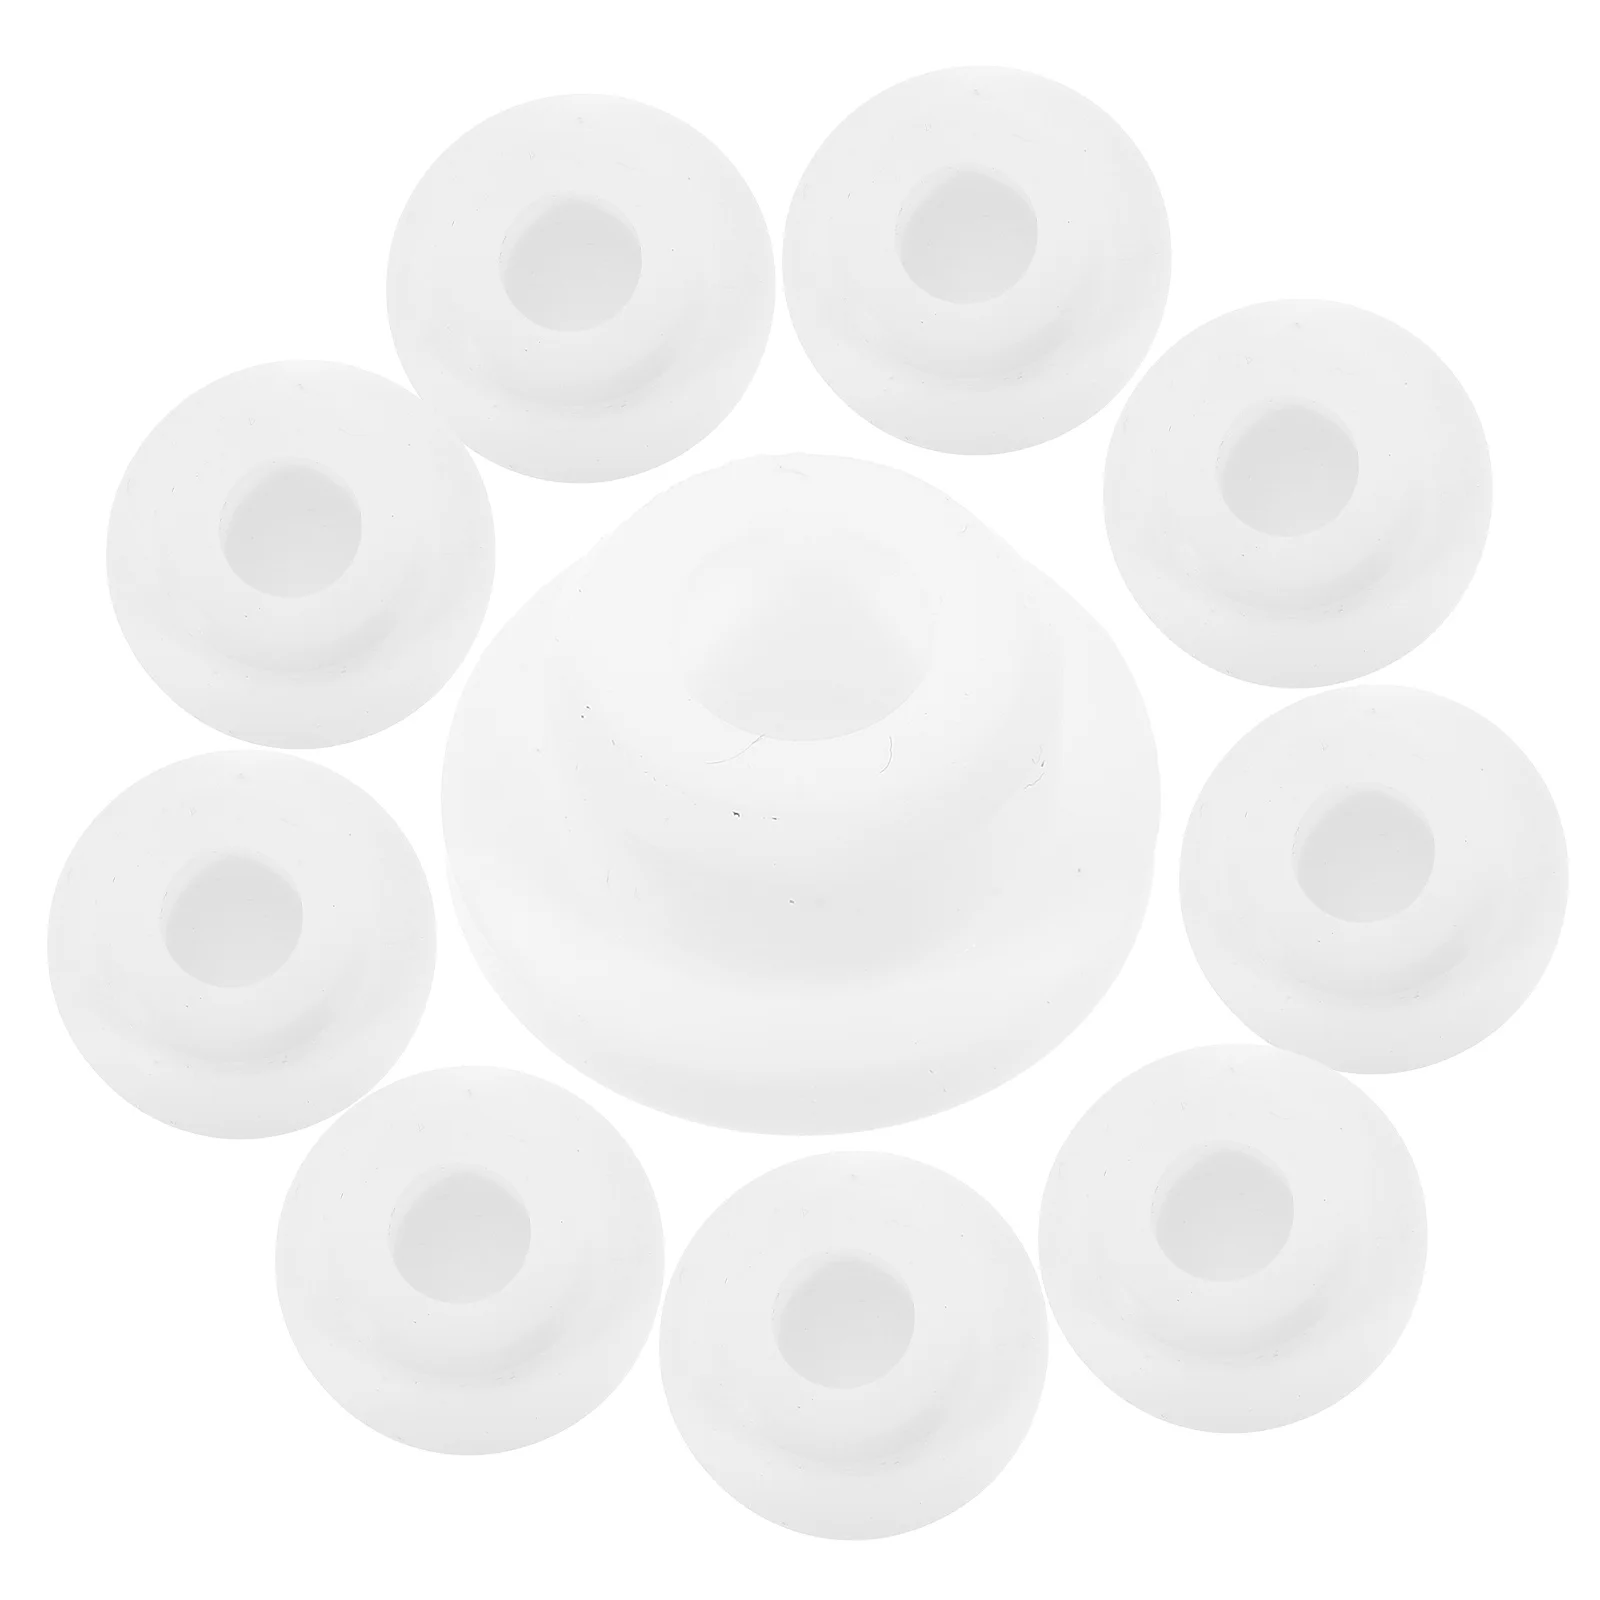 

10 Pcs Drain Cover Washbasin Overflow Sealing Side Hole Plug Bathroom Cabinet Sink Full Water Outlet Round (20mm) 10pcs Plastic